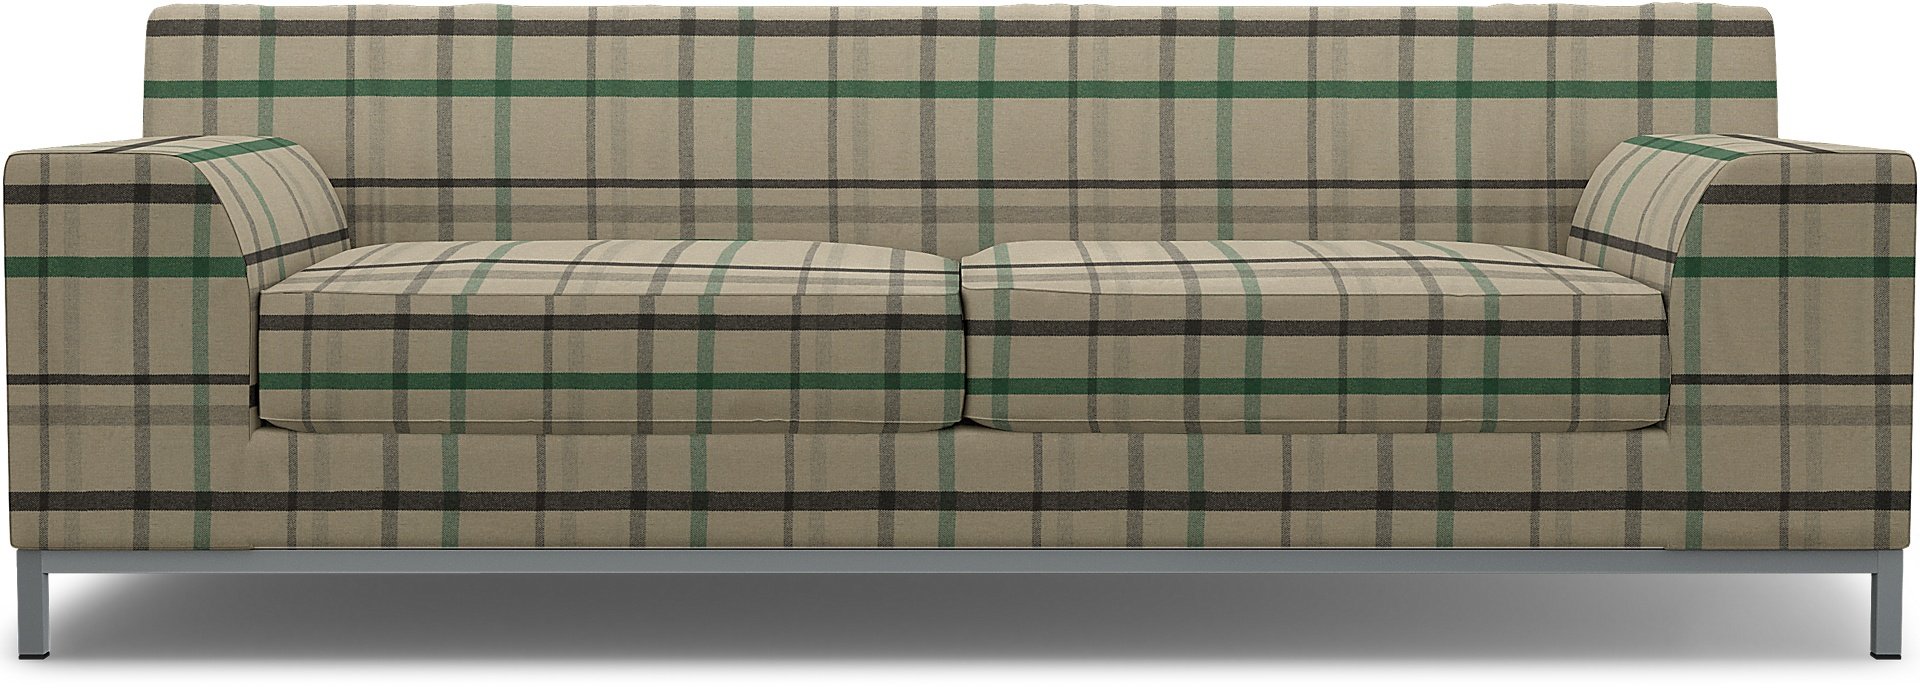 IKEA - Kramfors 3 Seater Sofa Cover, Forest Glade, Wool - Bemz